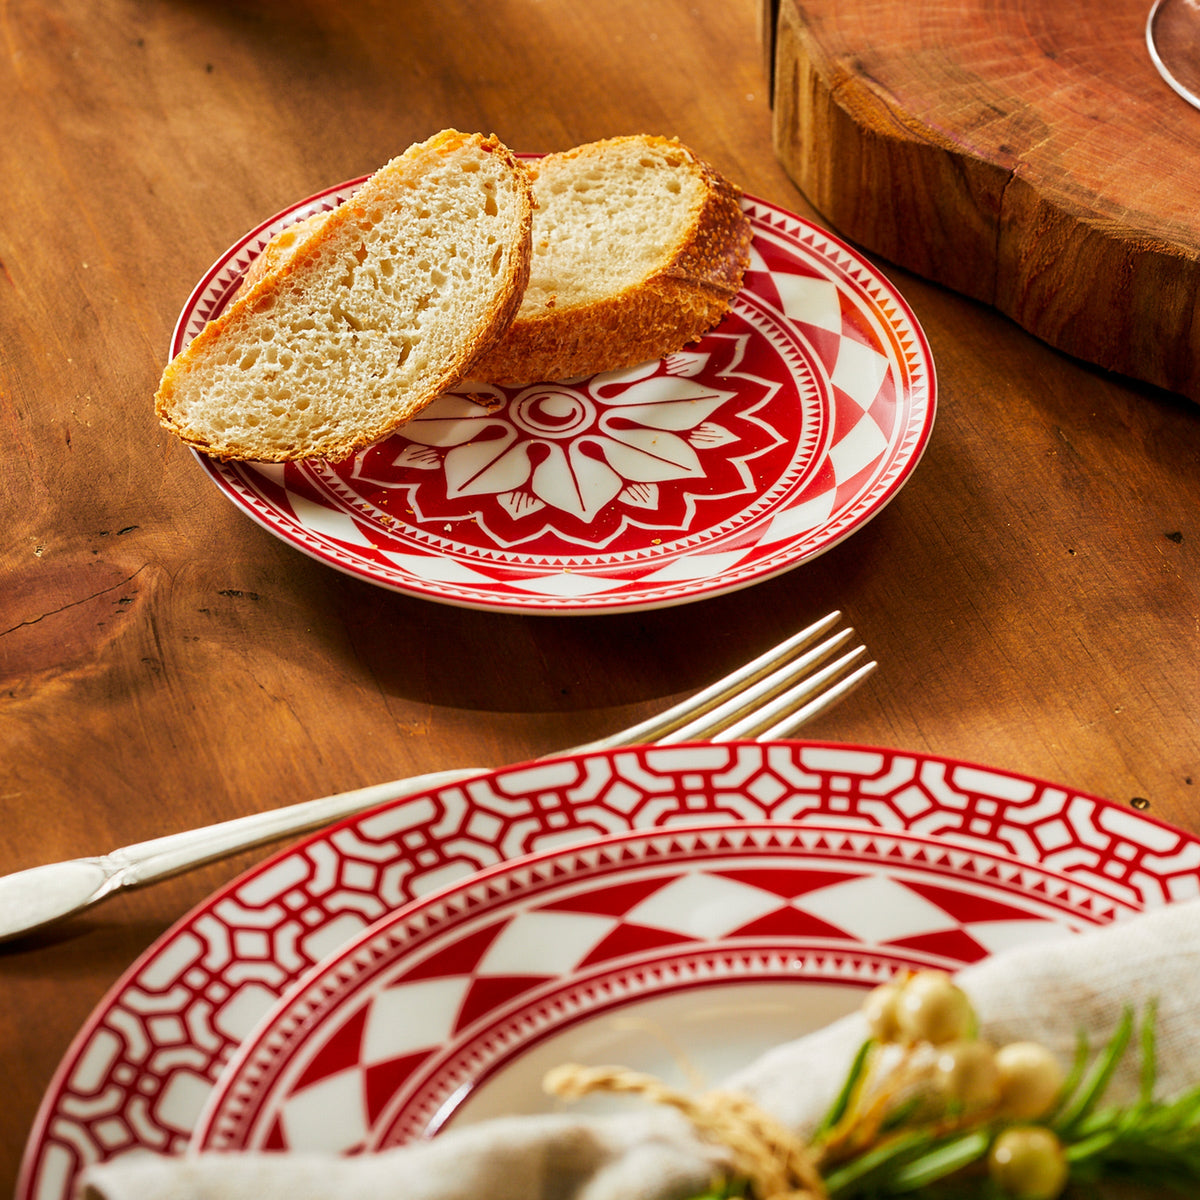 A Fez Crimson Canapé plate from Caskata Artisanal Home with bread and a fork on a table in Morocco.